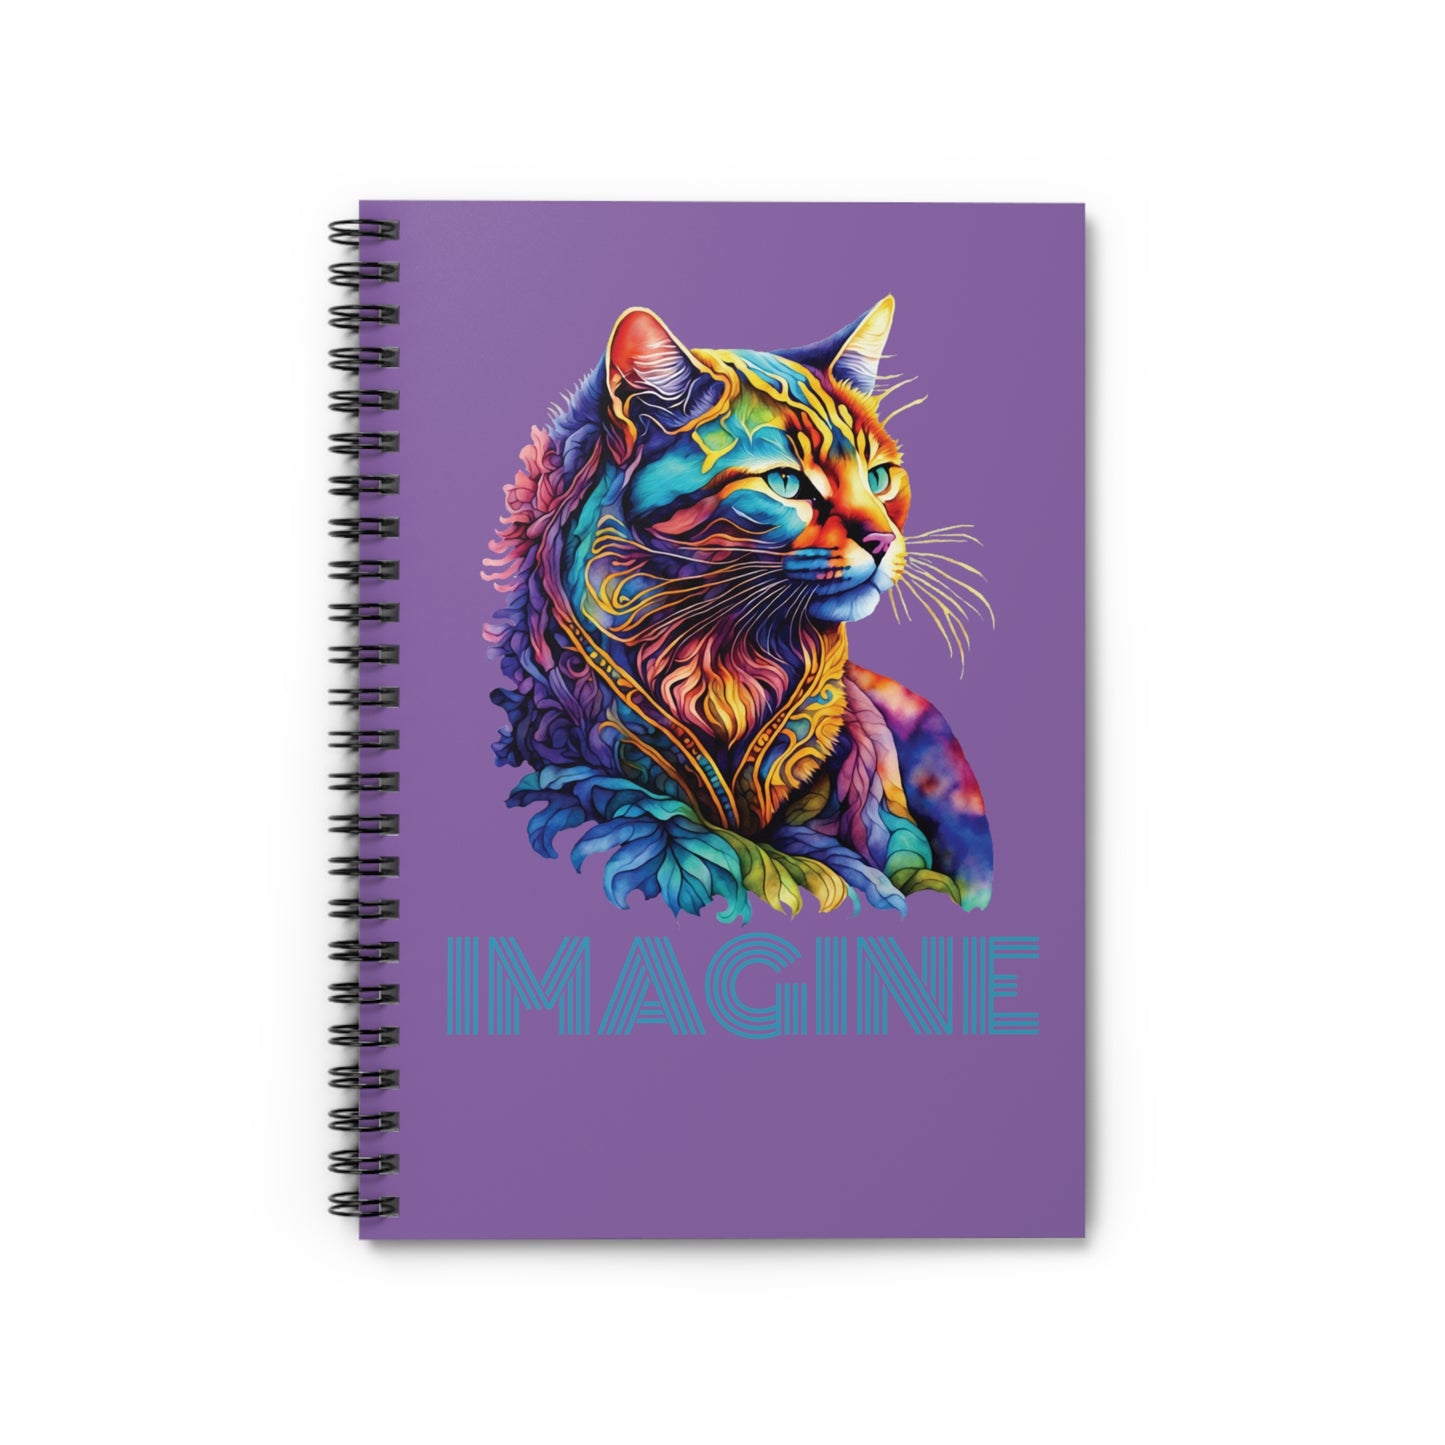 Cat IMAGINE lavender Spiral Notebook - Ruled Line, Perfect Gift For Cat Lovers